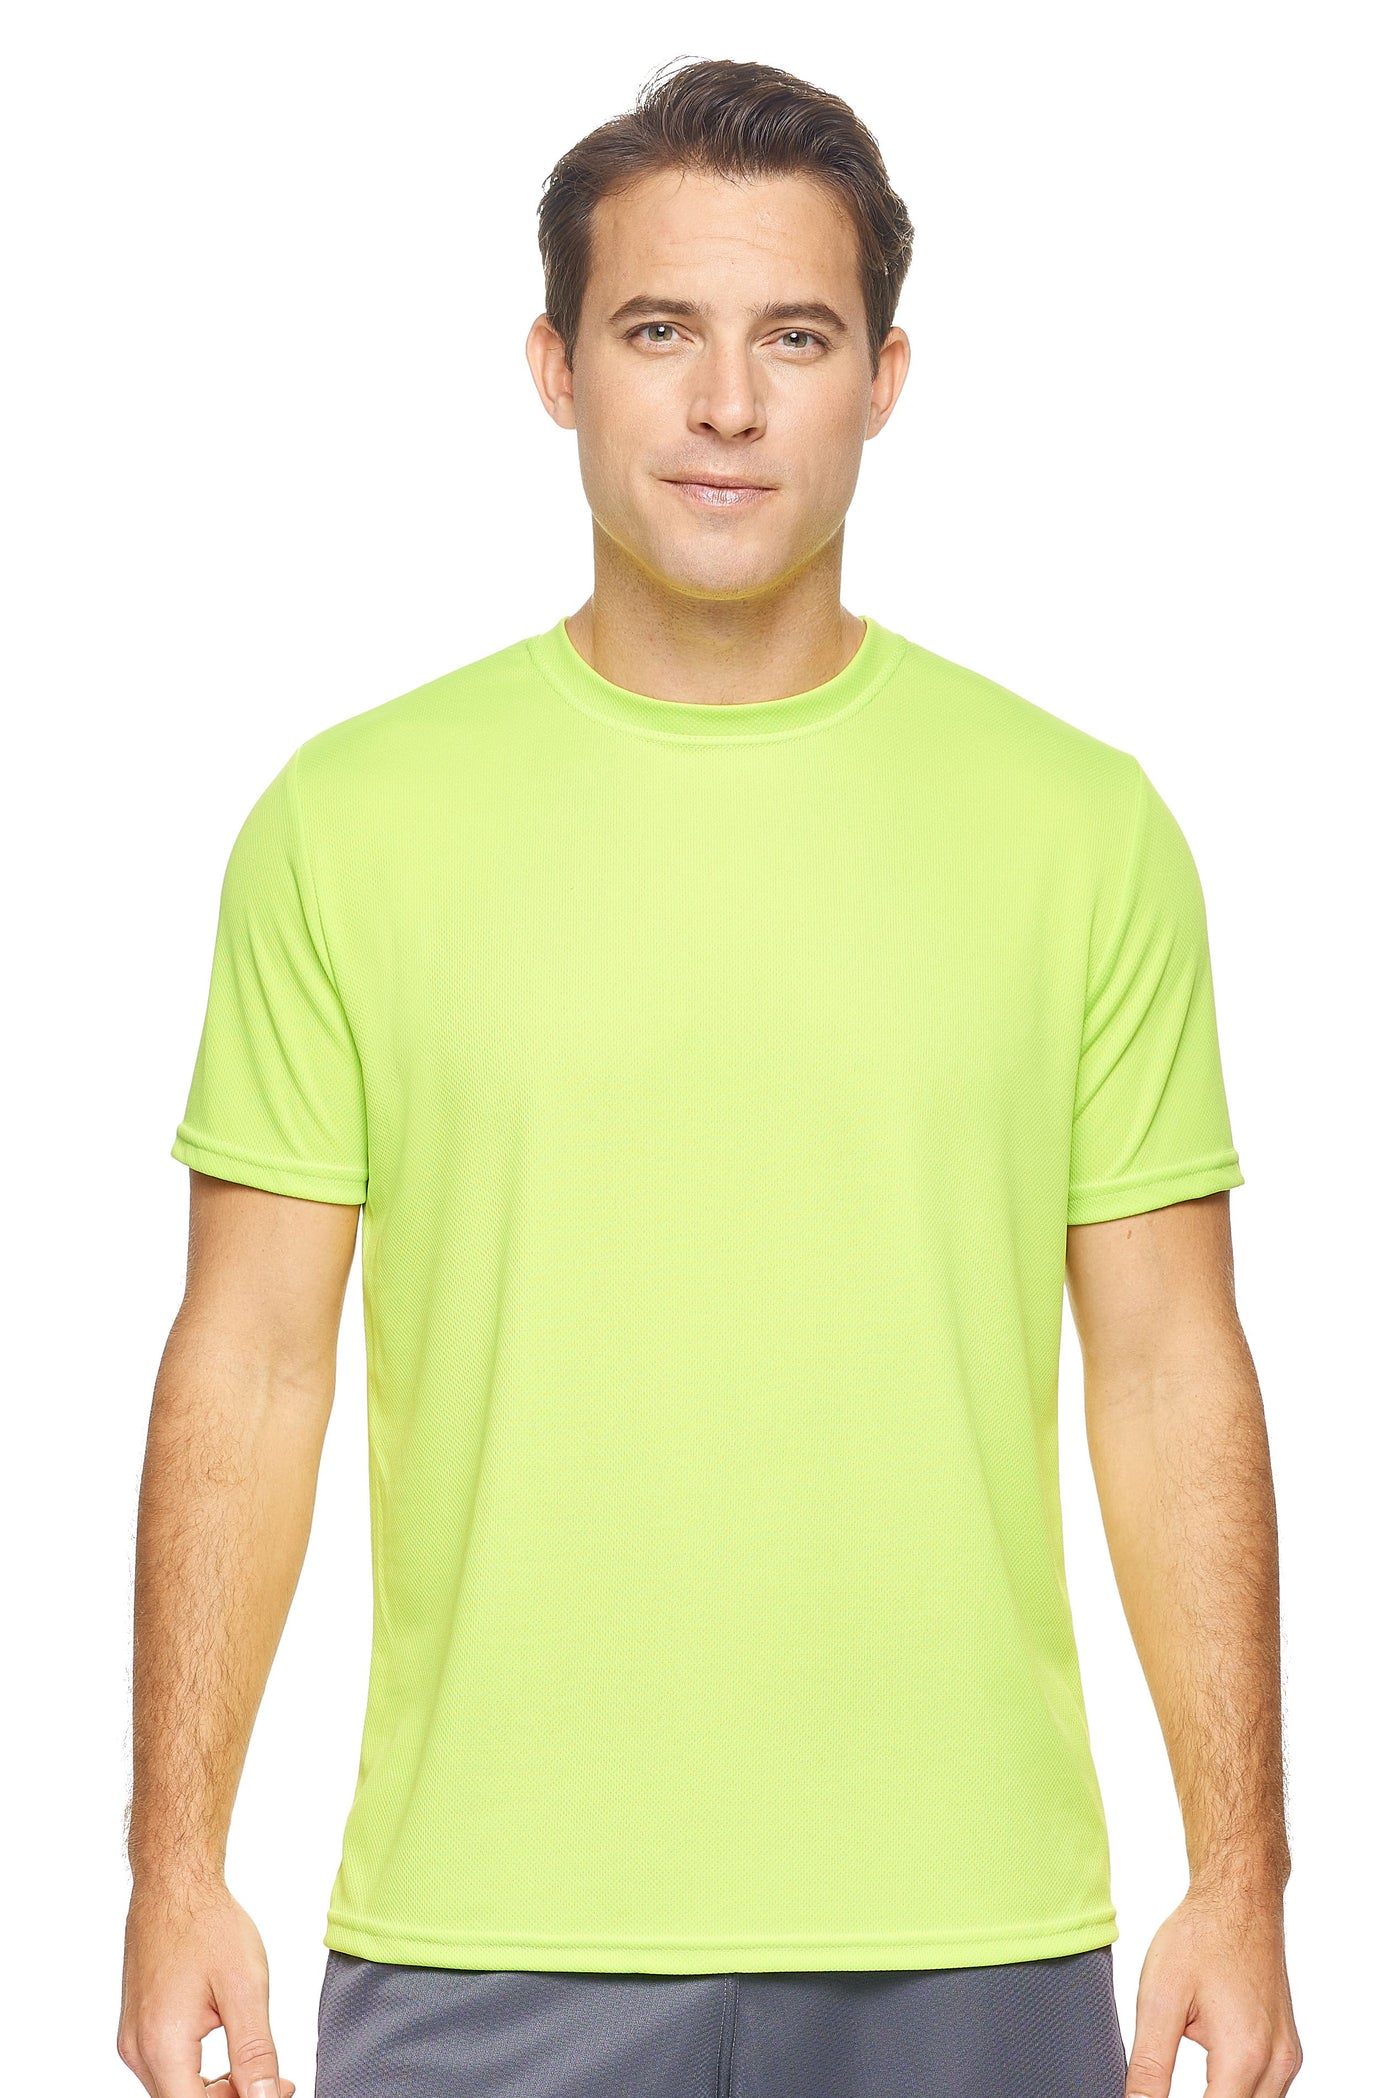 Expert Brand Retail Sportswear Men's Oxymesh Tec Tee Made in USA activewear Key Lime#color_key-lime